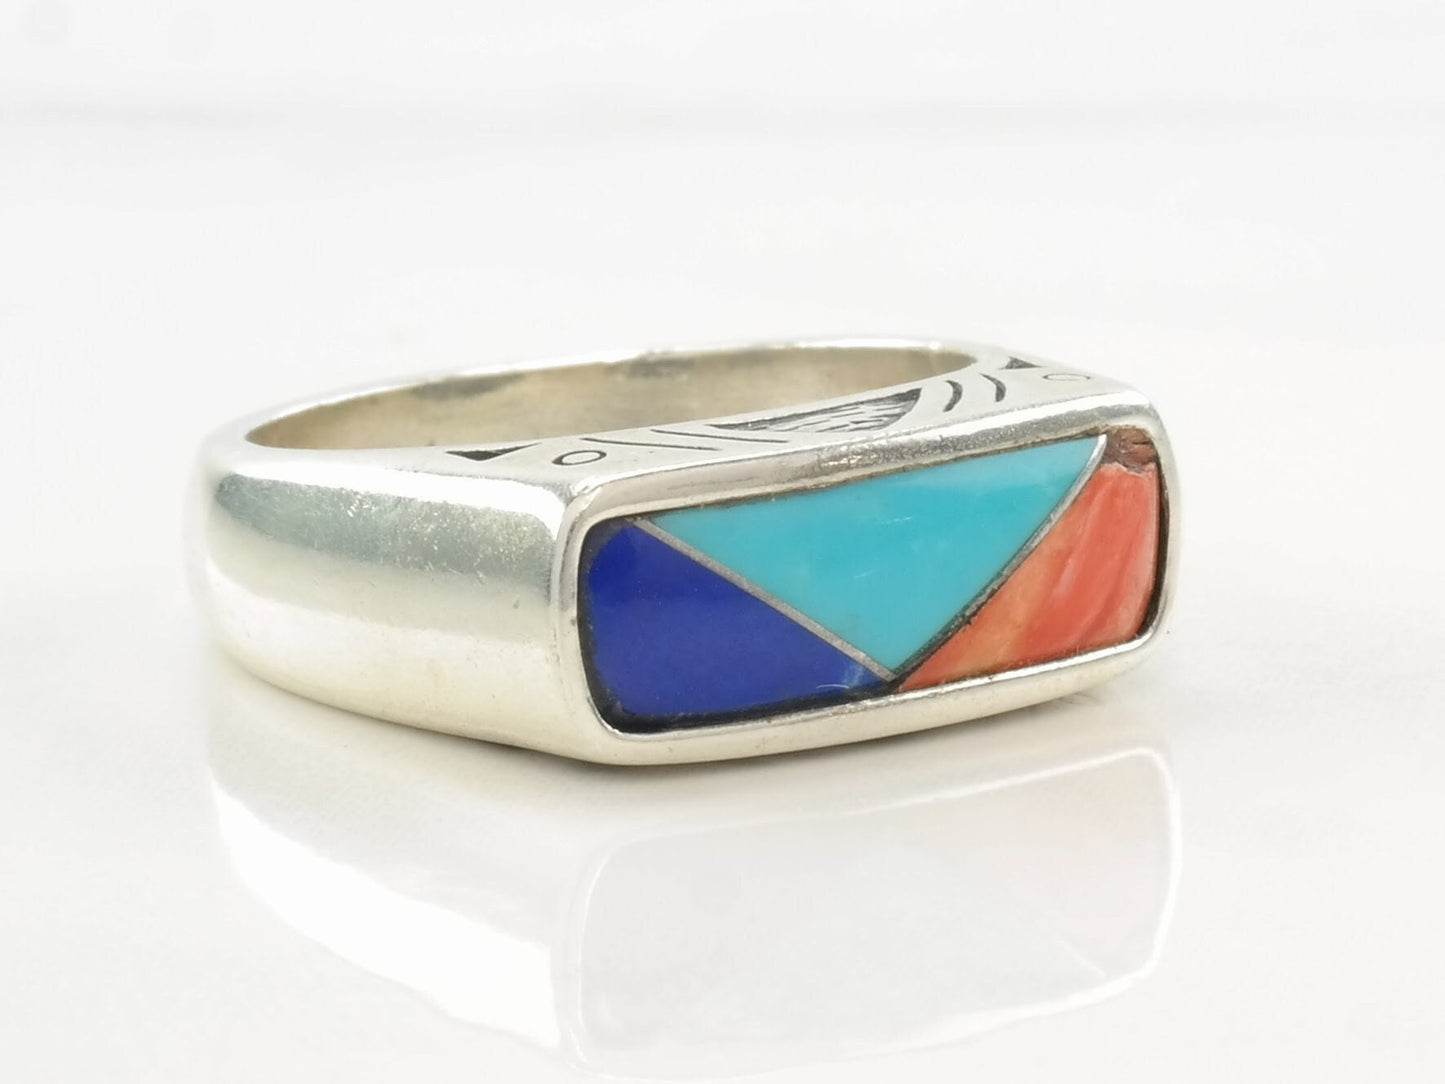 Vintage Carolyn Pollack Ring Spiny Oyster, Turquoise, Lapis Lazuli Inlay Sterling Silver Size 6 1/4